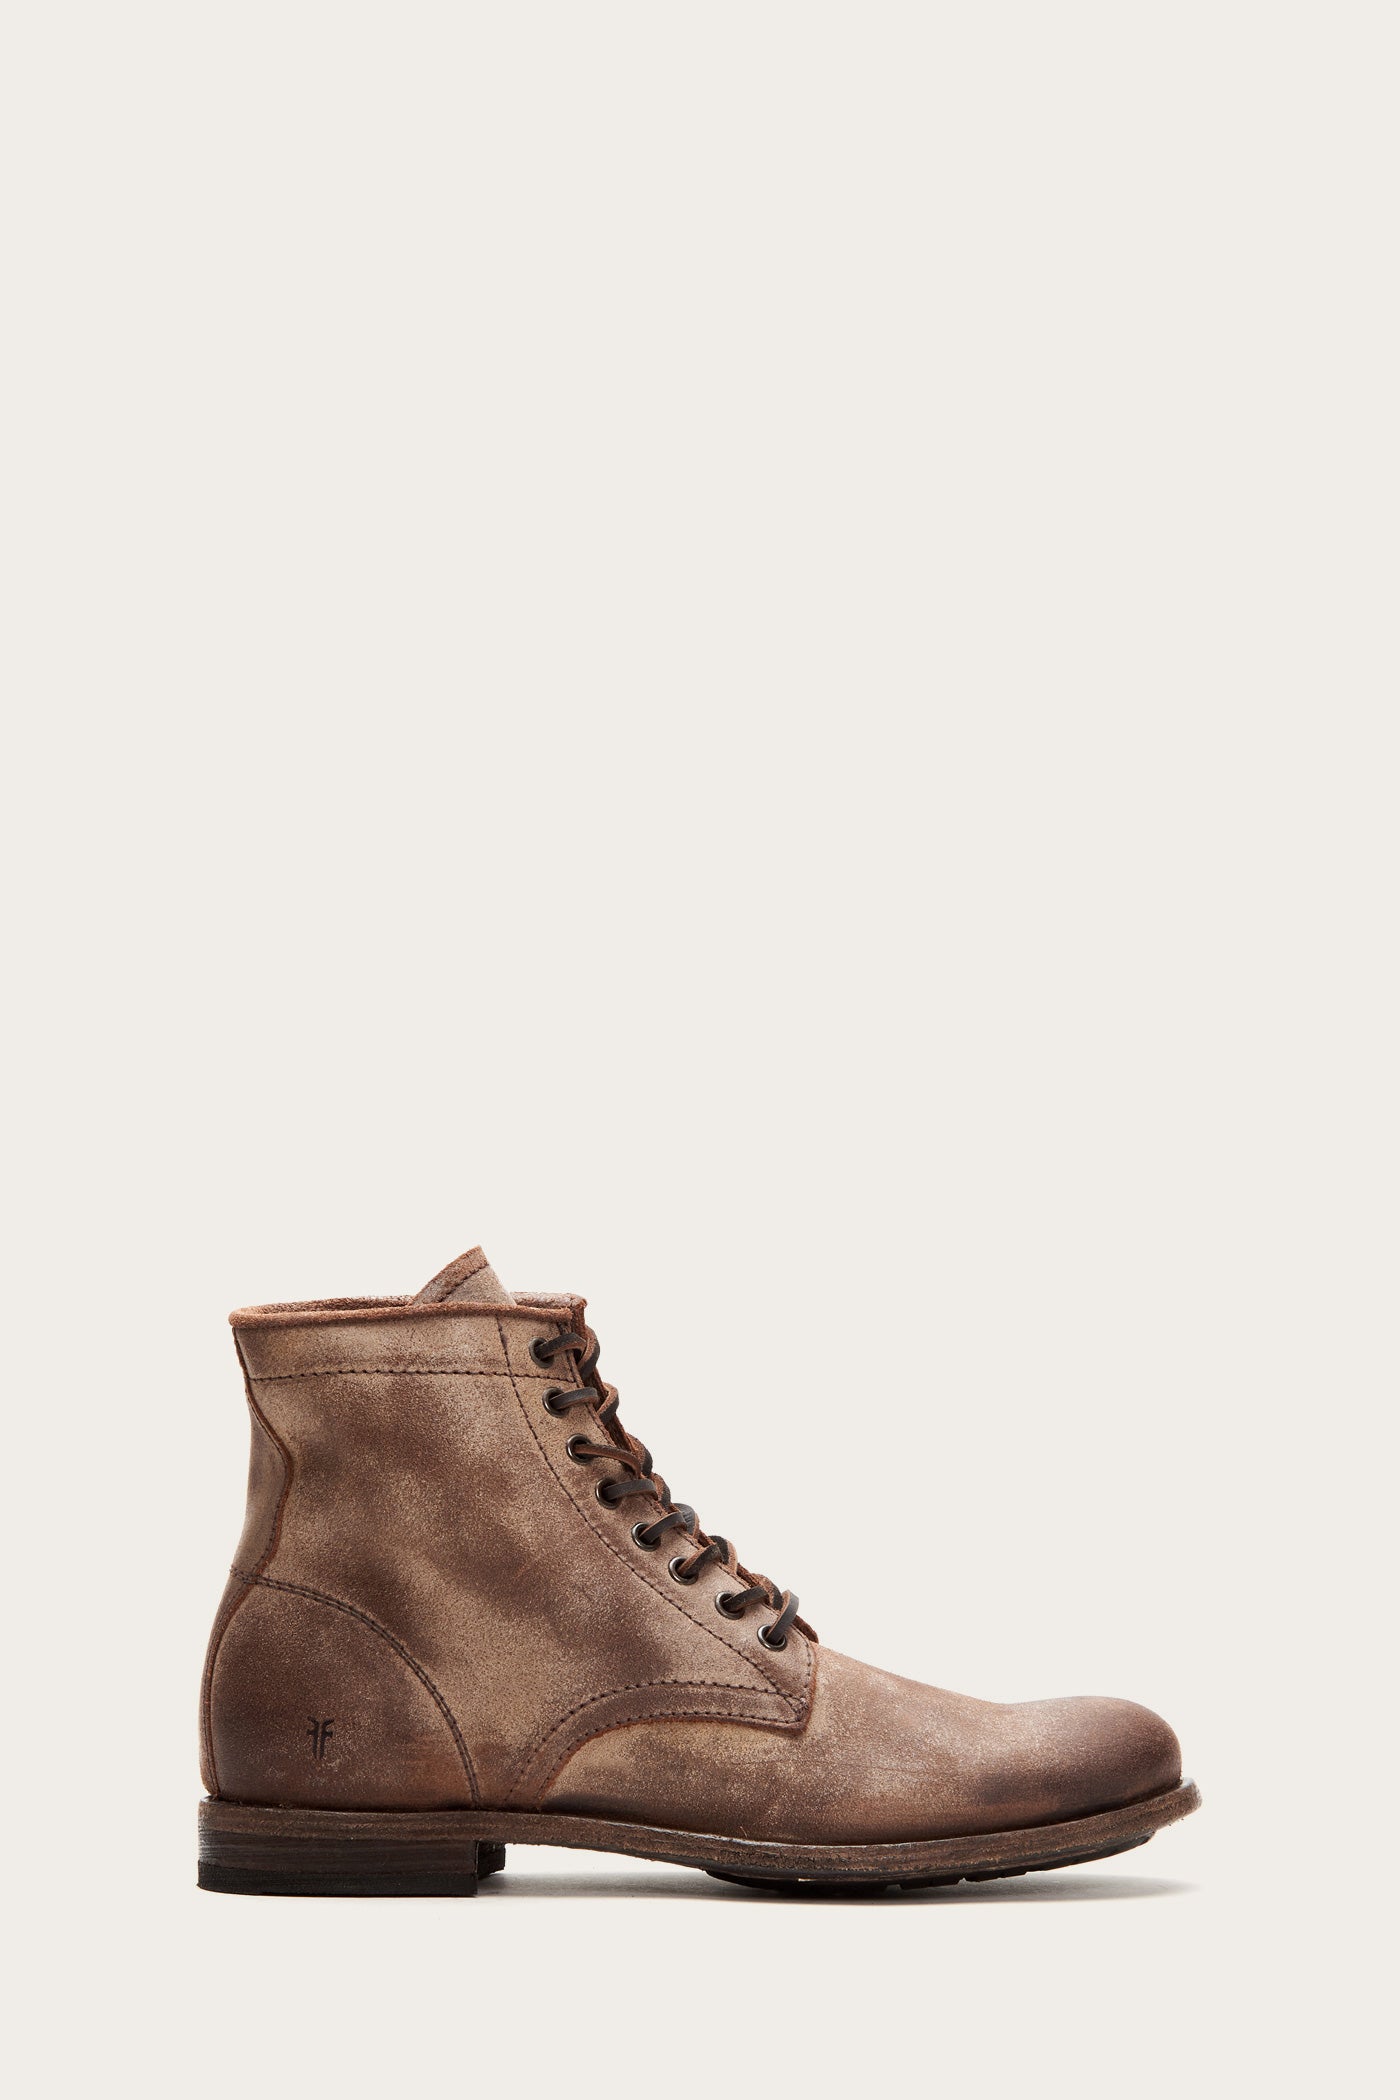 frye tyler lace up mens